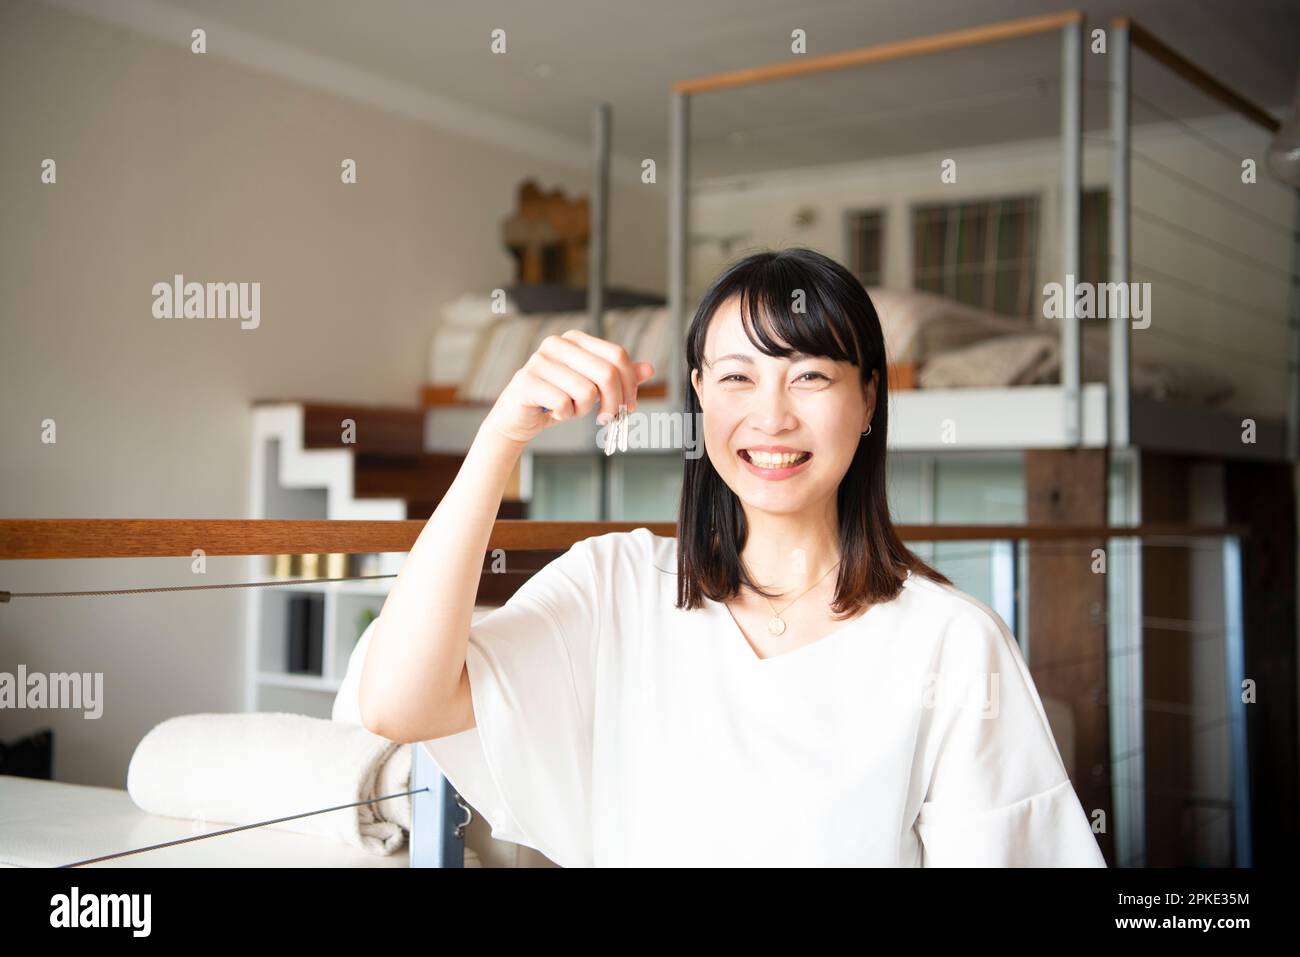 Woman laughing with keys Stock Photo